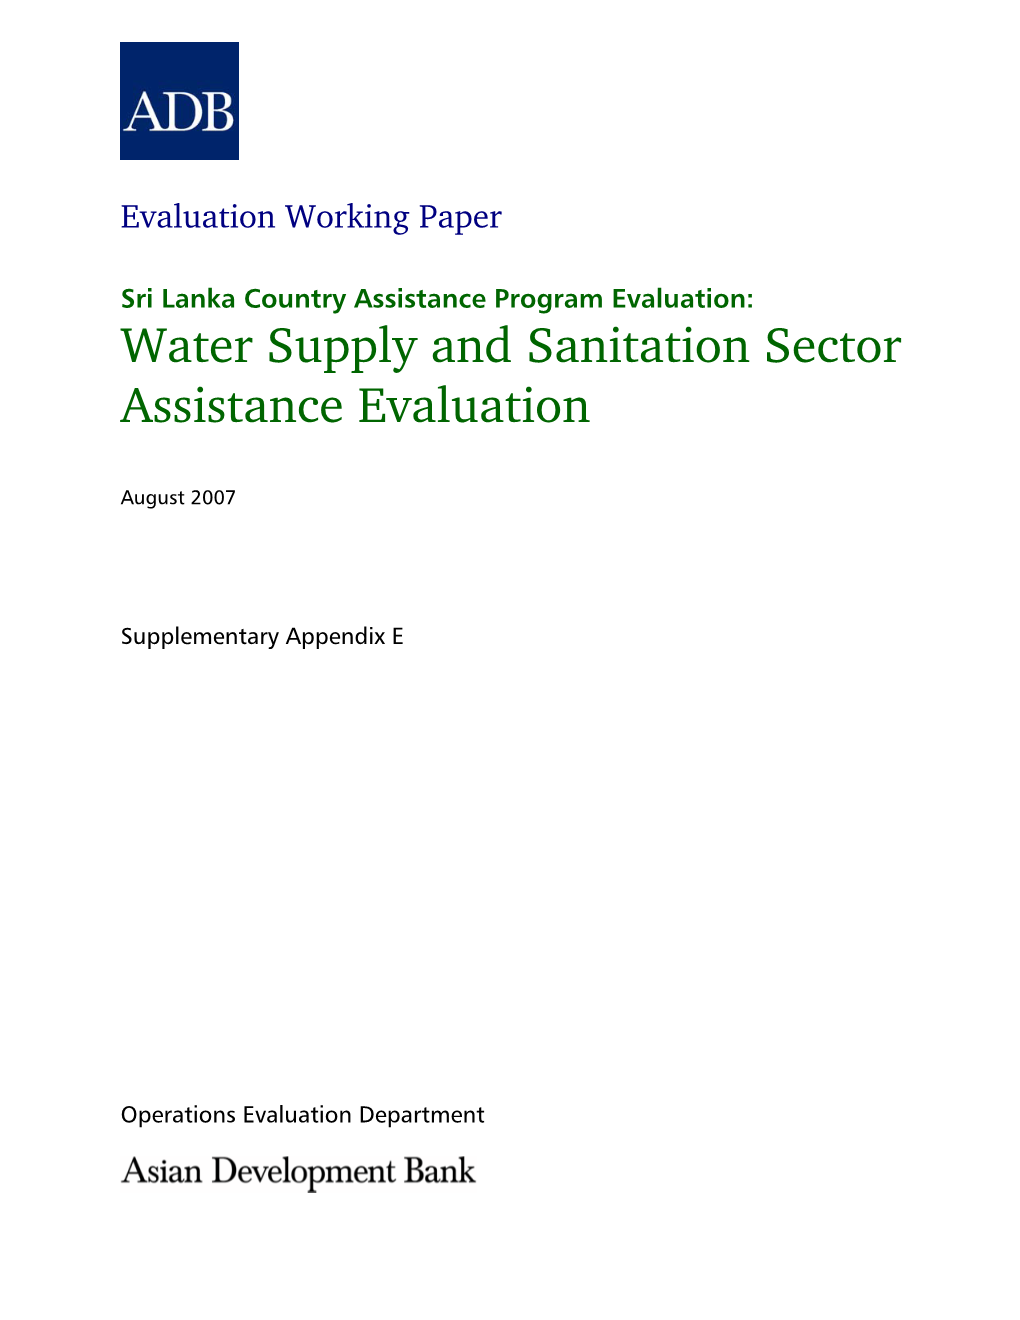 Evaluation of Water Supply and Sanitation Sector Assistance